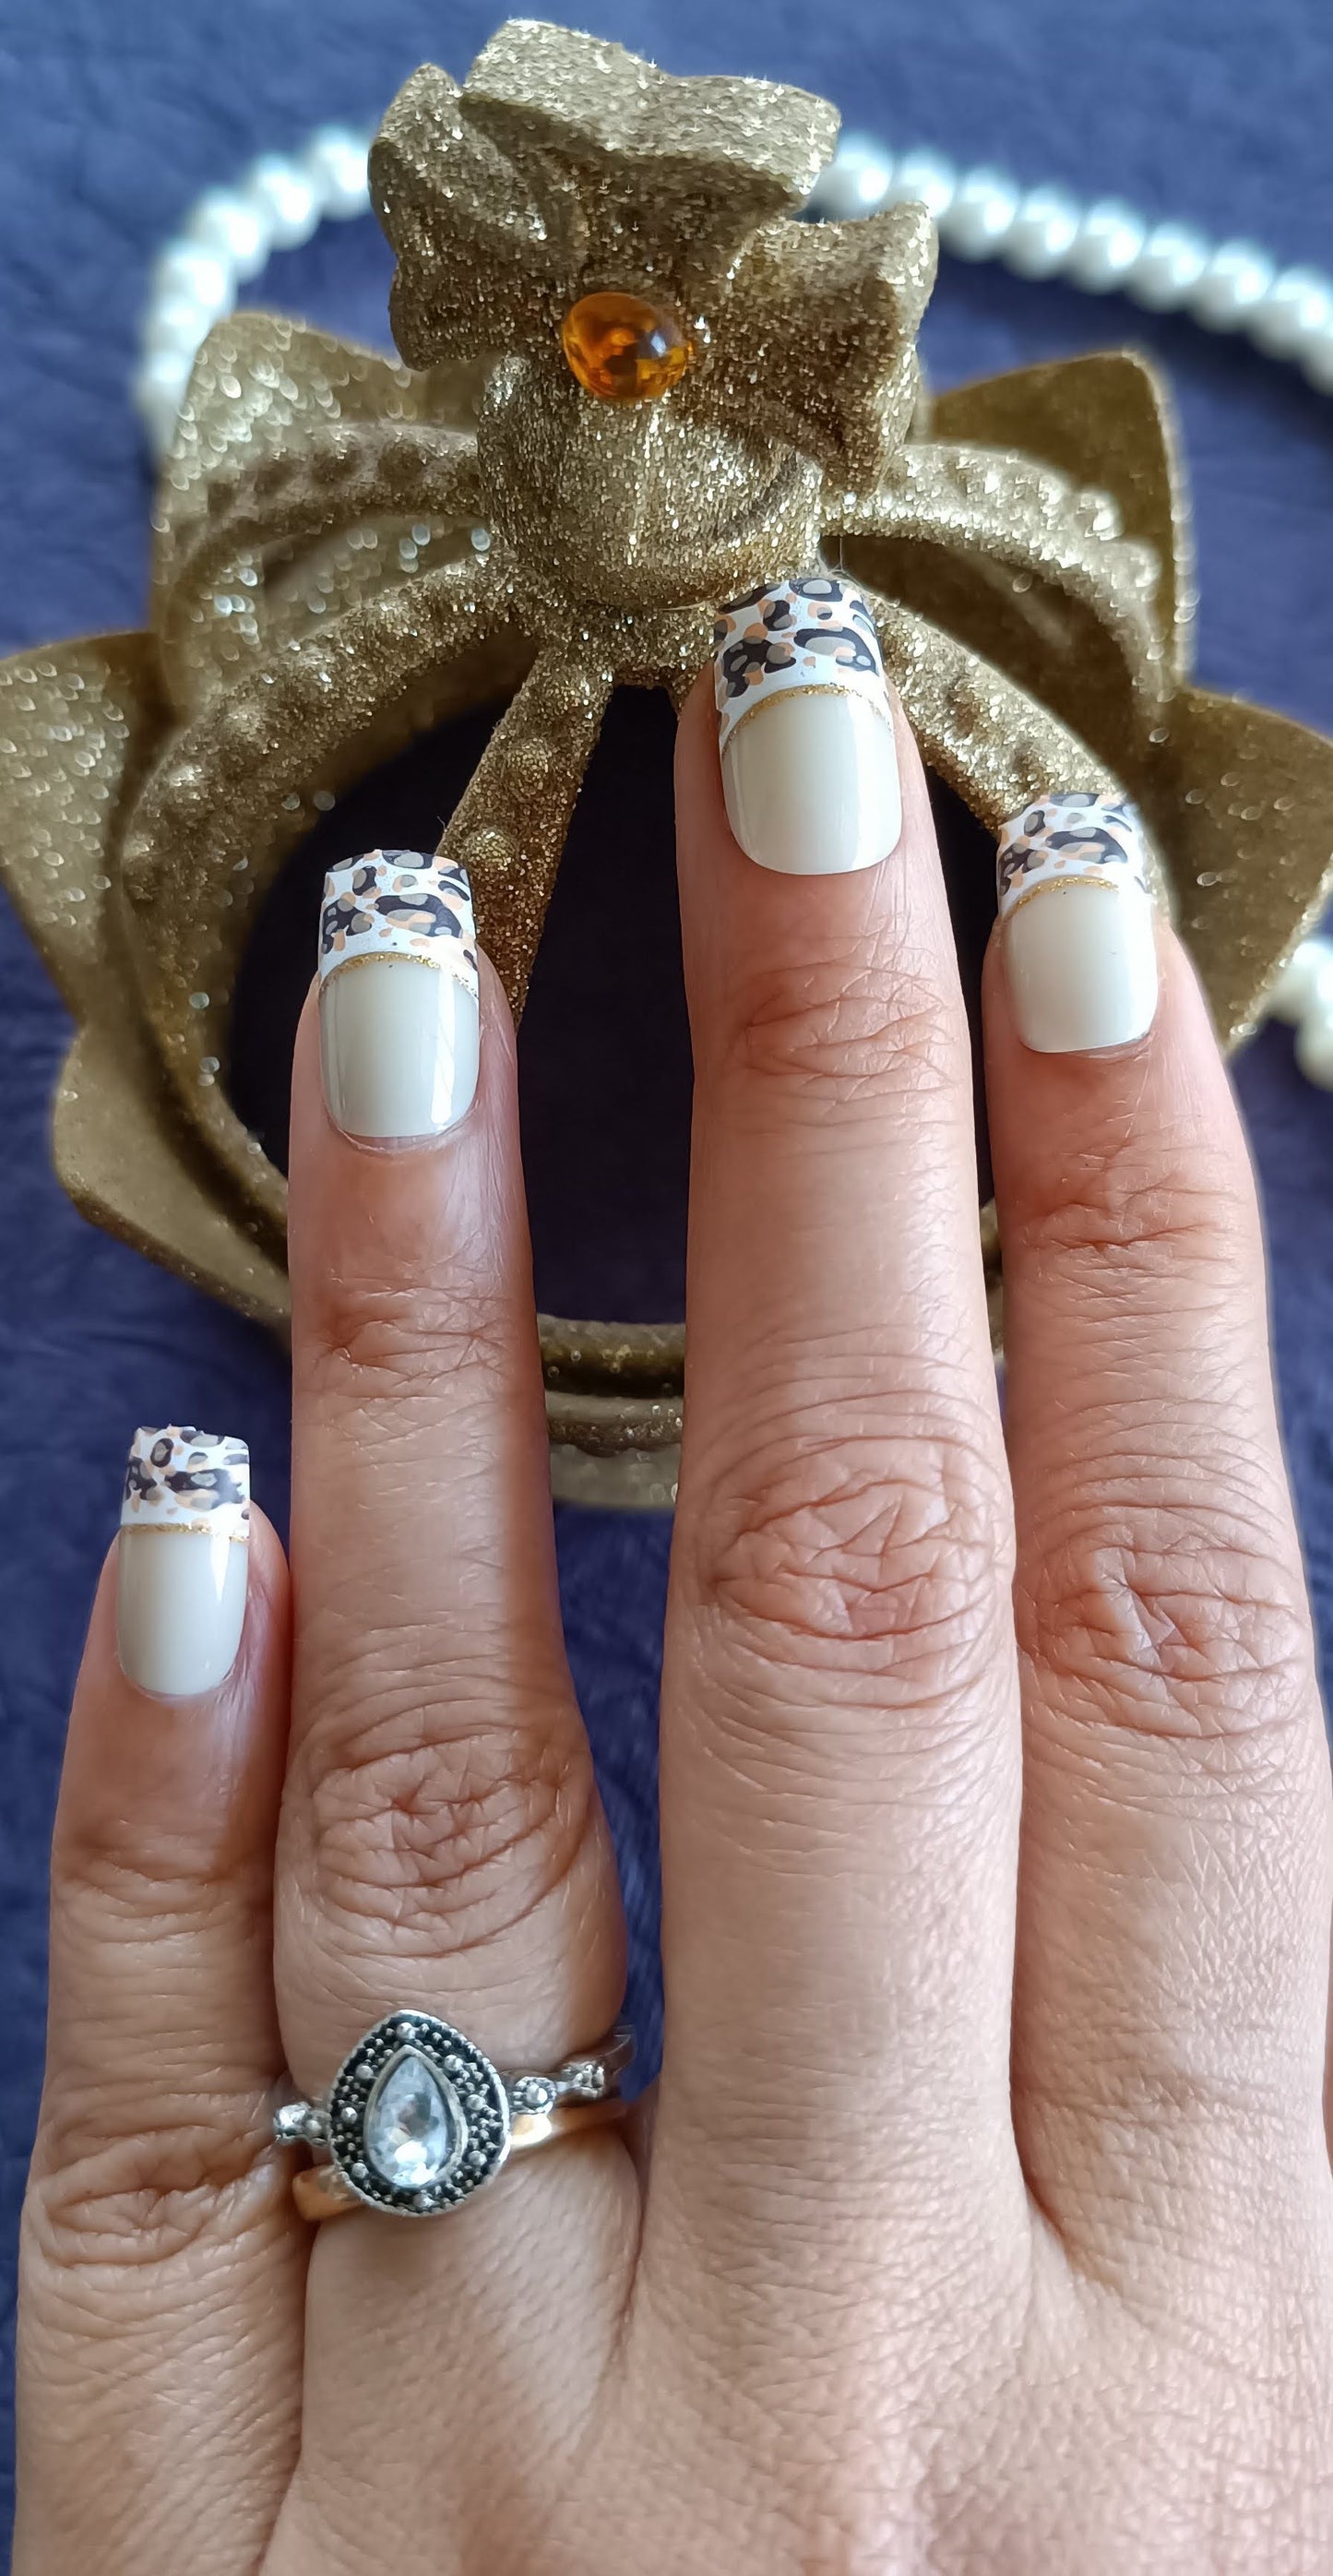 Acrylic/ Press-on Designer Nails with Glue Tabs | Artificial Nails Under 50 - Brown-White designer French Tips